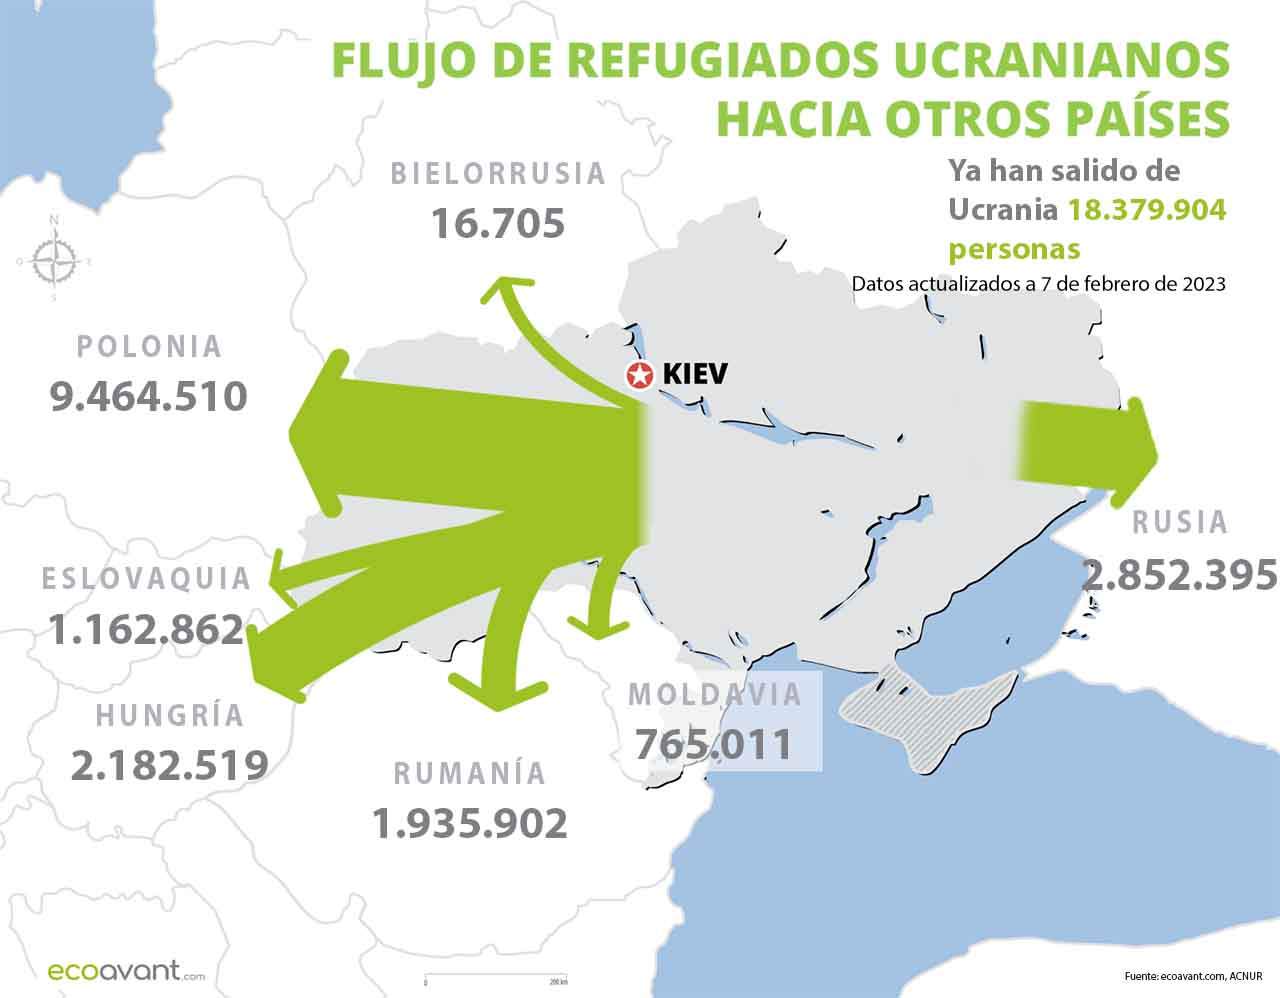 Flow of refugees from Ukraine to other countries as of February 7, 2022 / Map: EA